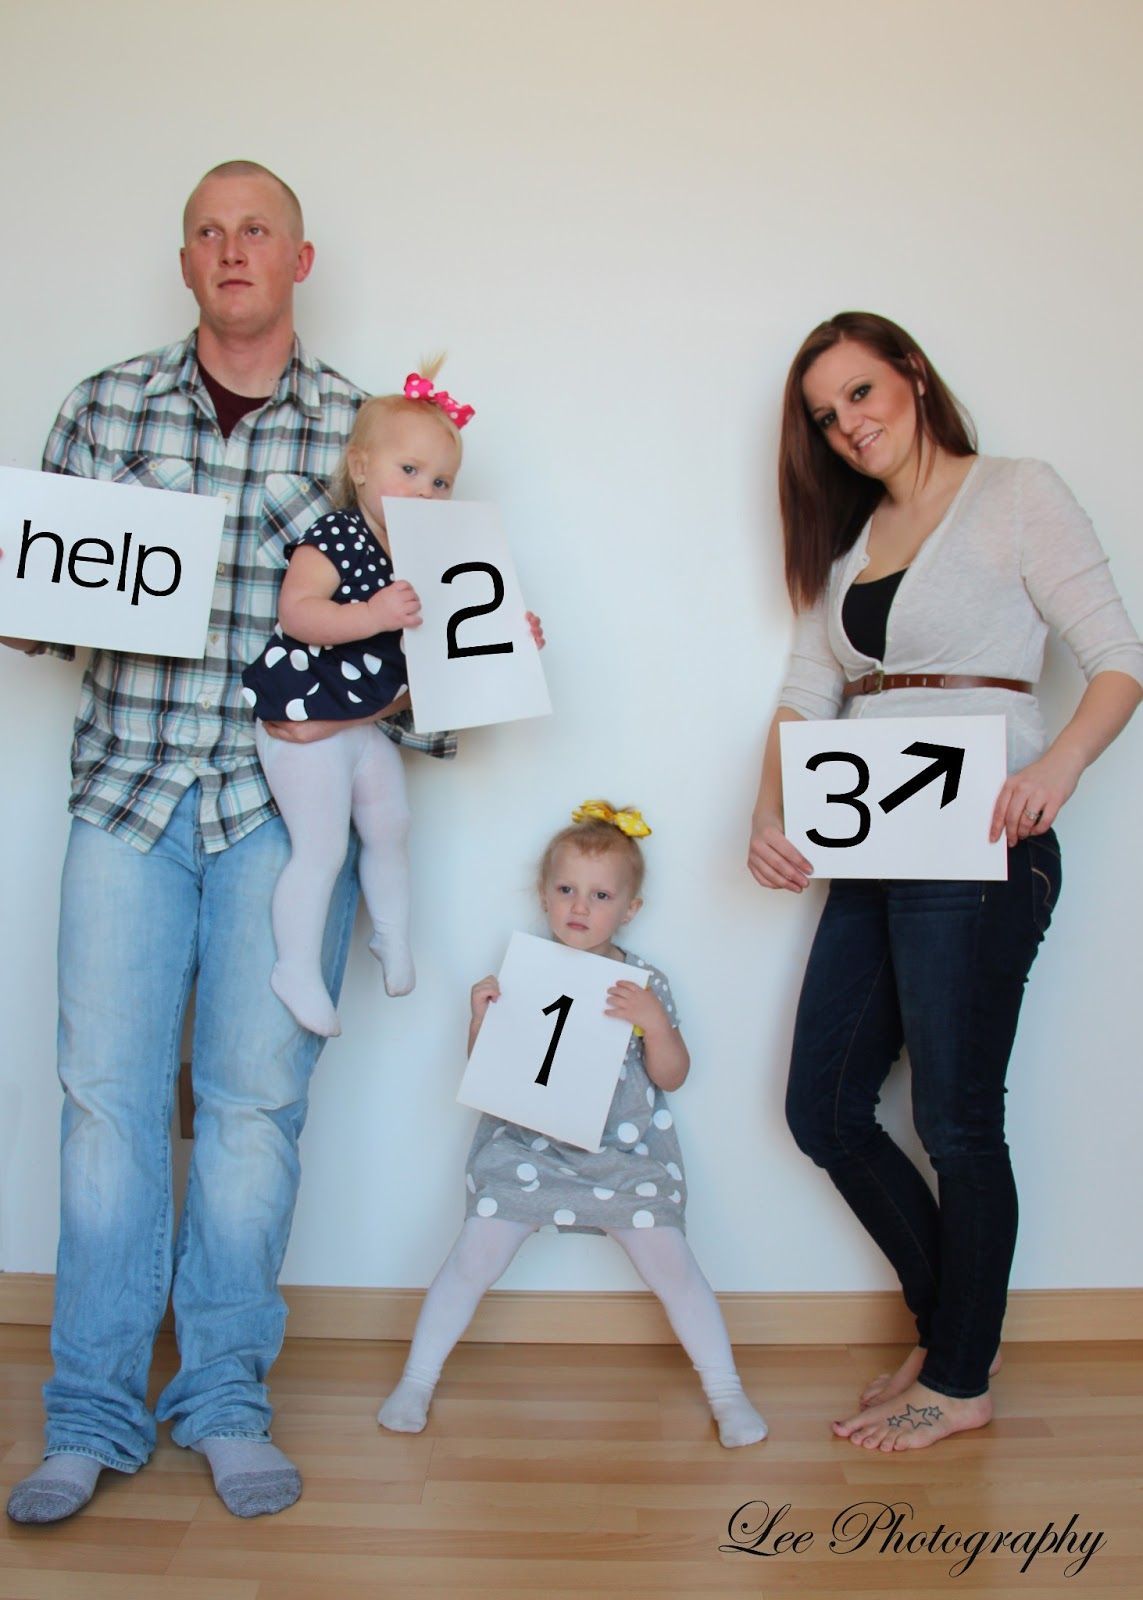 1, 2, 3, Help.  Pregnancy reveal, baby number 3 photography idea